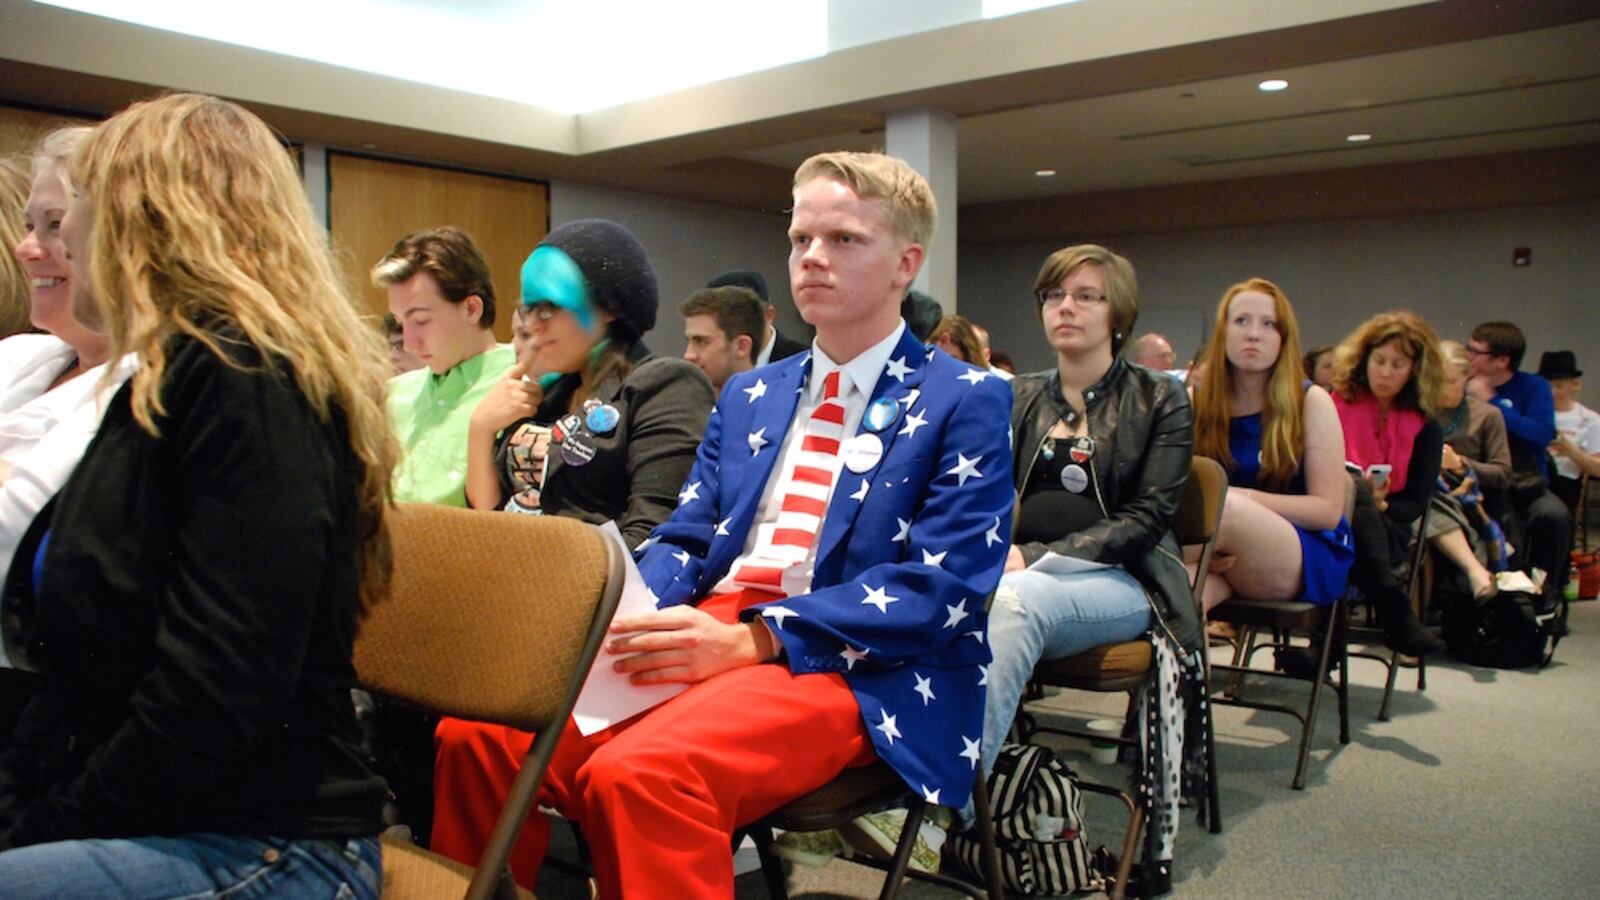 Garrett Hjelle, a Columbine High School student, was one of about 10 students ejected from a Jeffco Public Schools board meeting for attempting to disrupt the evening.